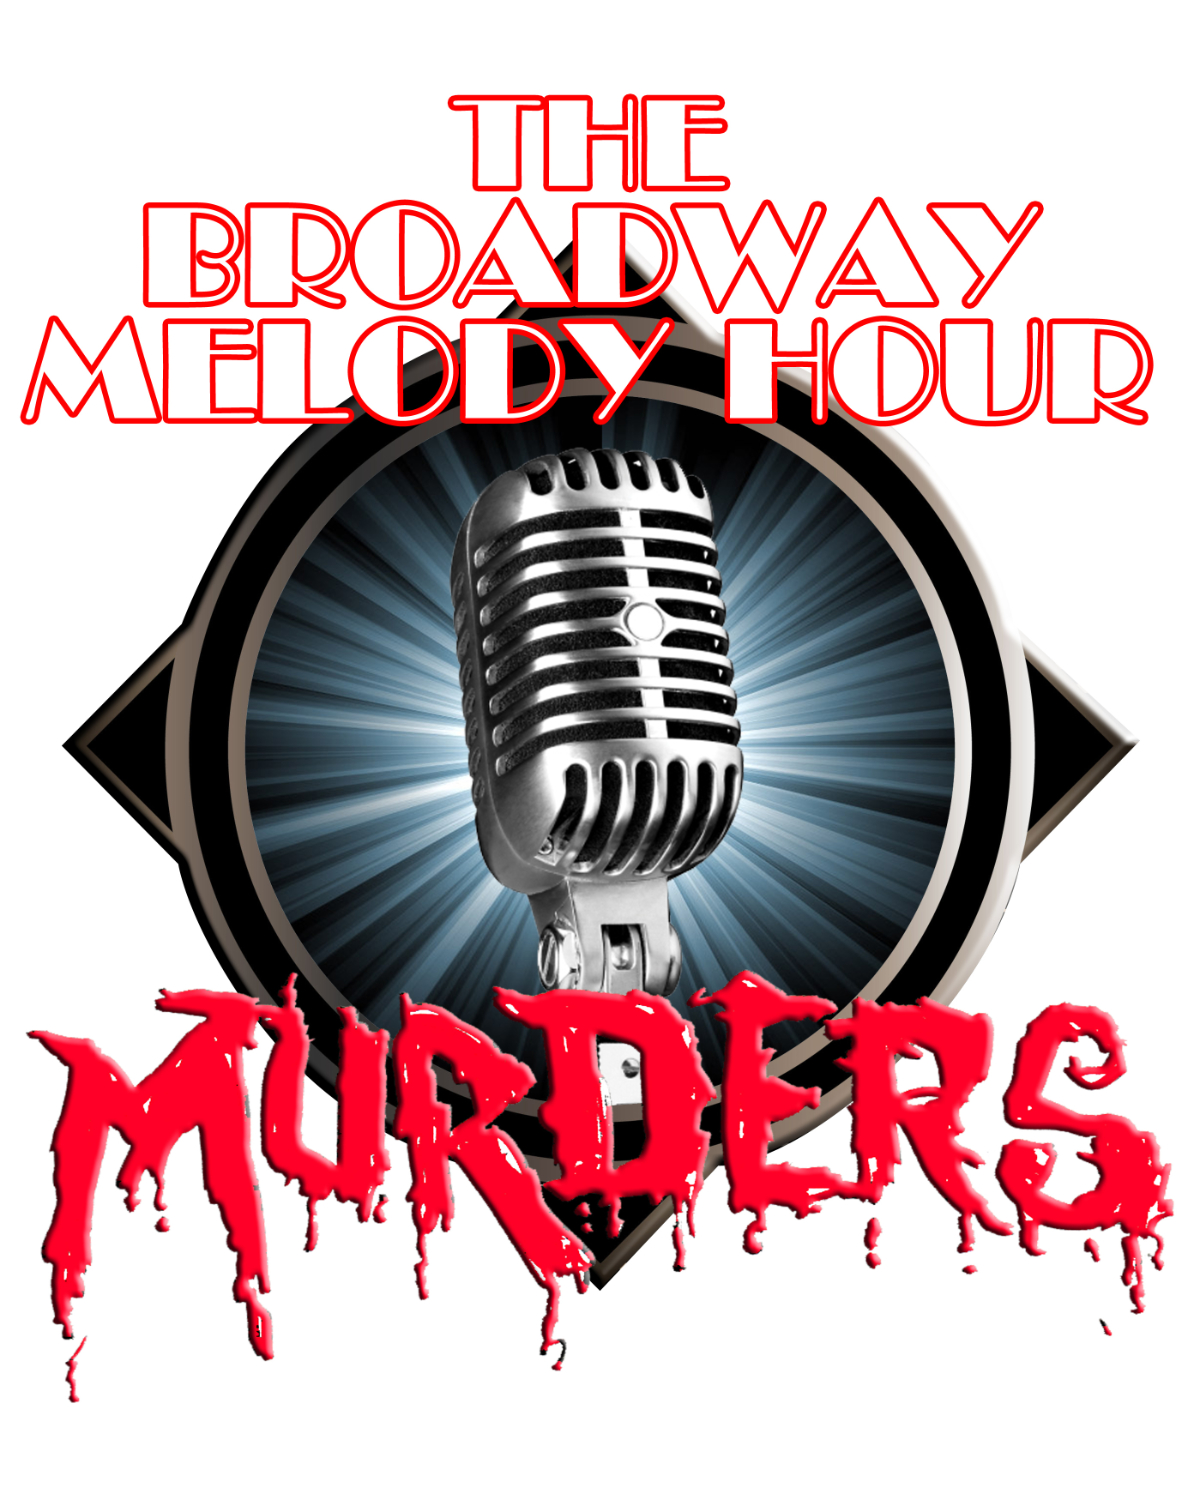 Broadway-Melody-Hour-Murders